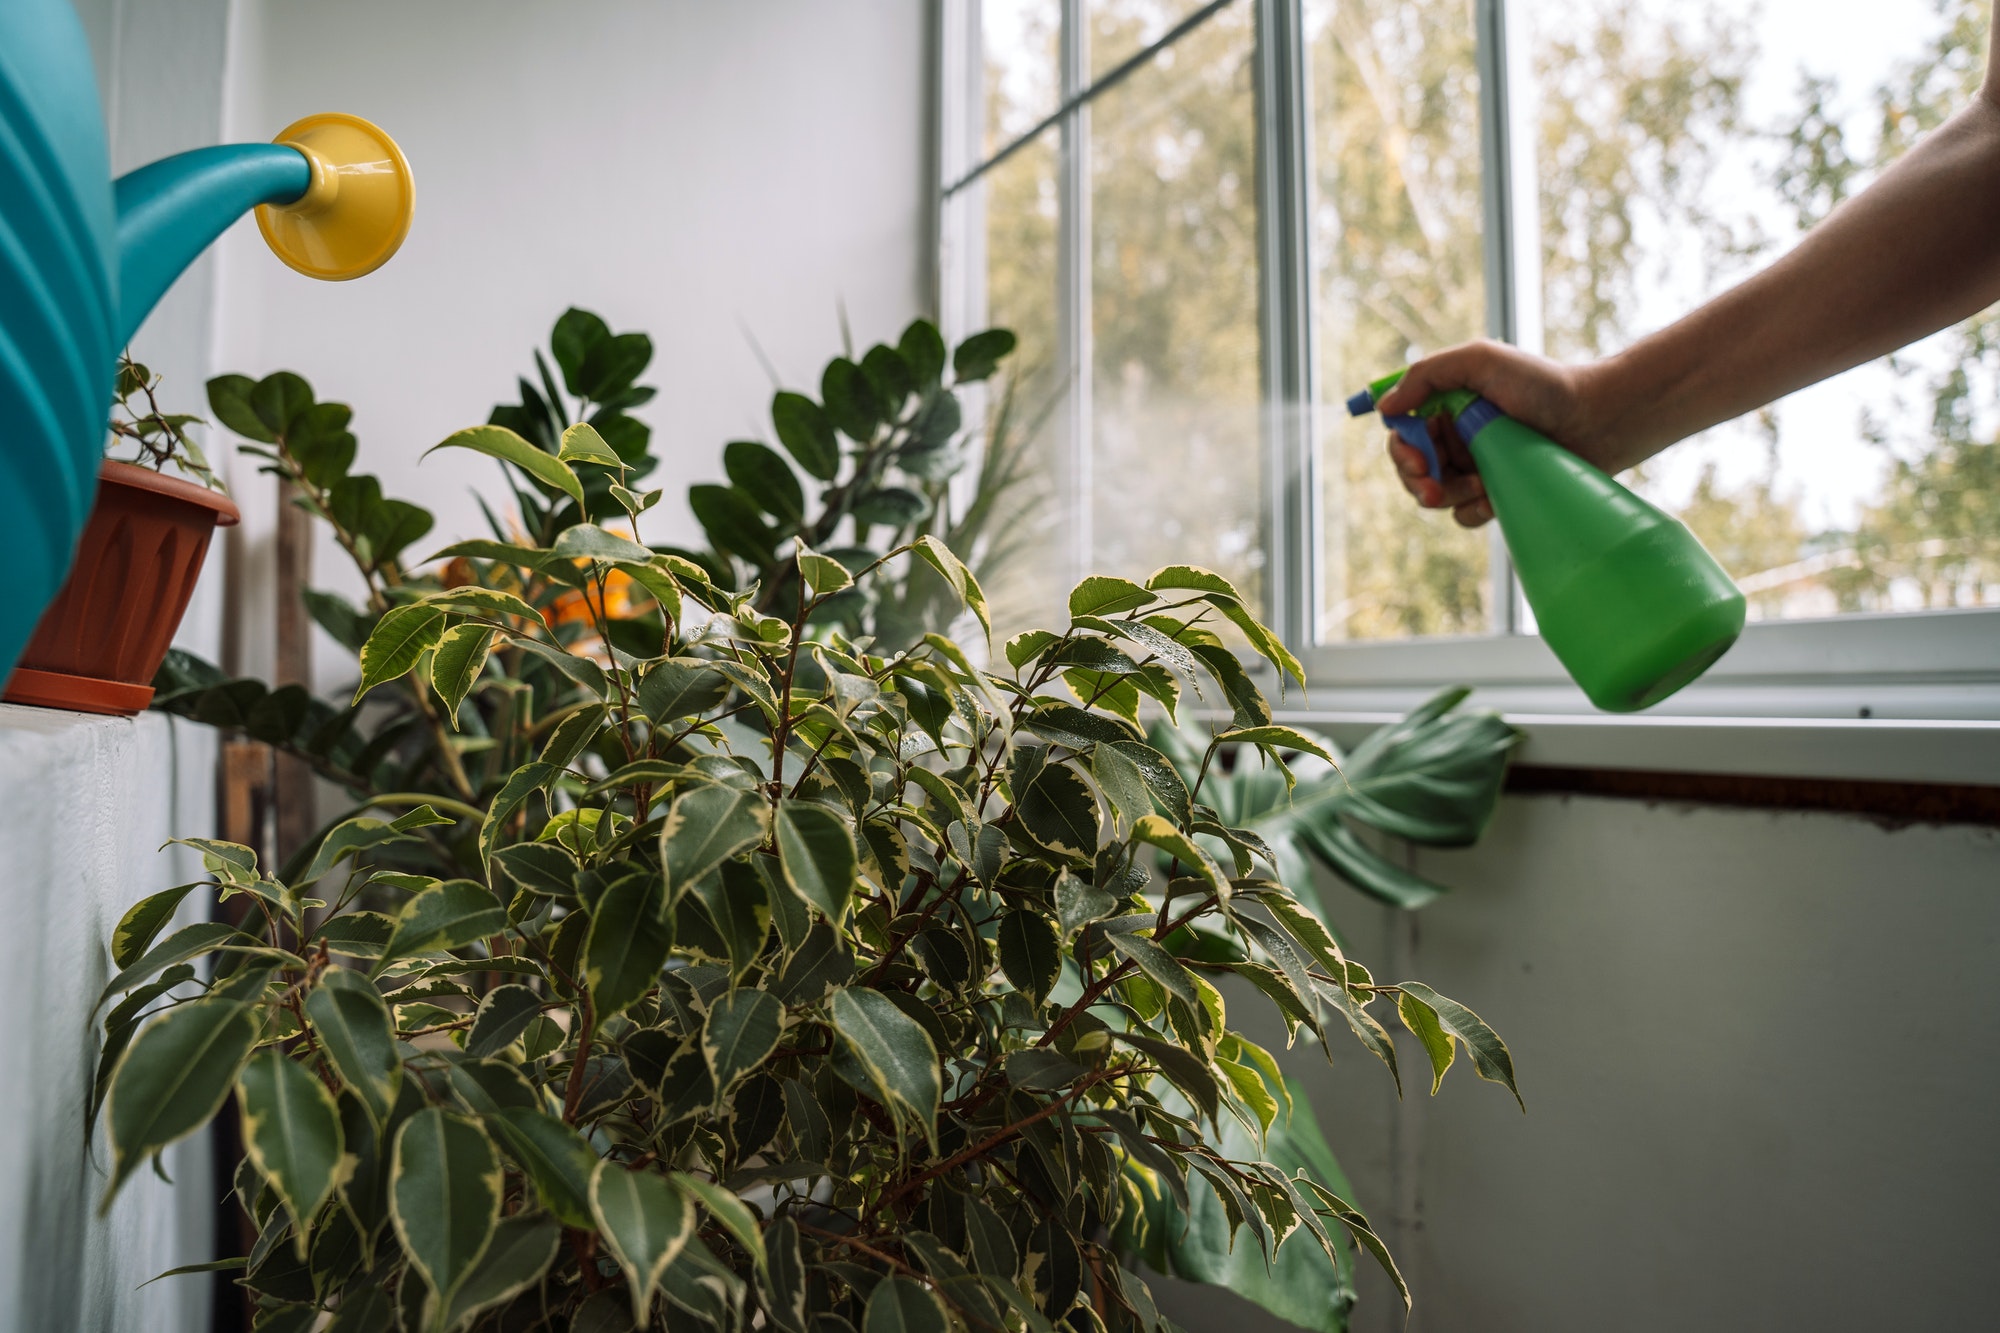 Spraying and caring for indoor plants in a greenhouse